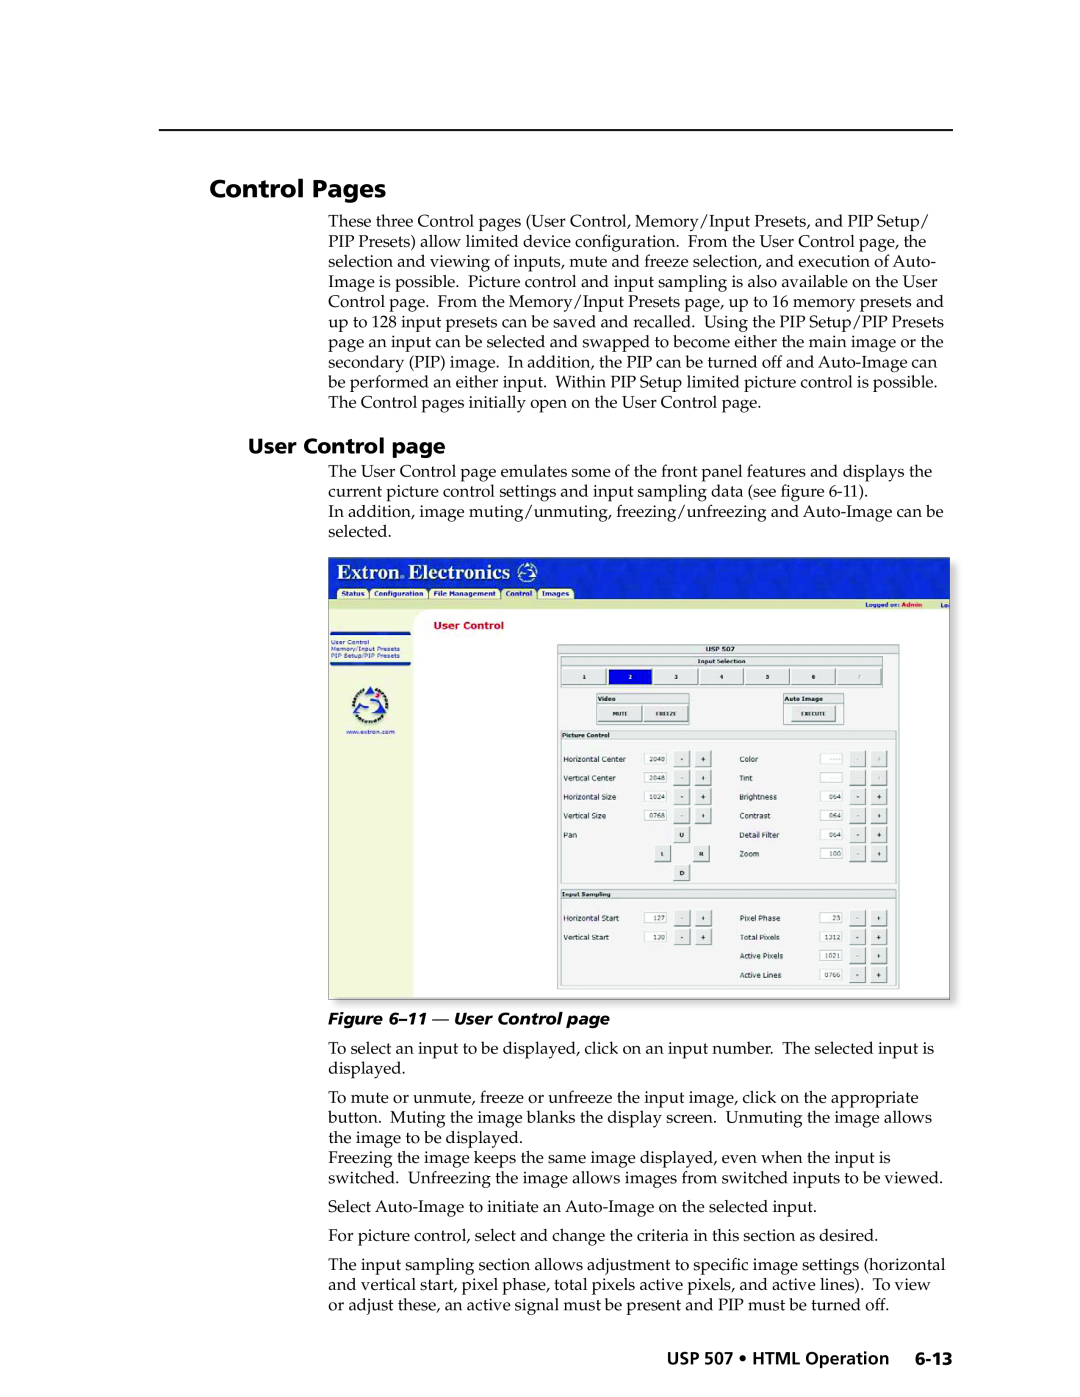 Extron electronic manual Control Pages, 11 - User Control page, USP 507 • HTML Operation 